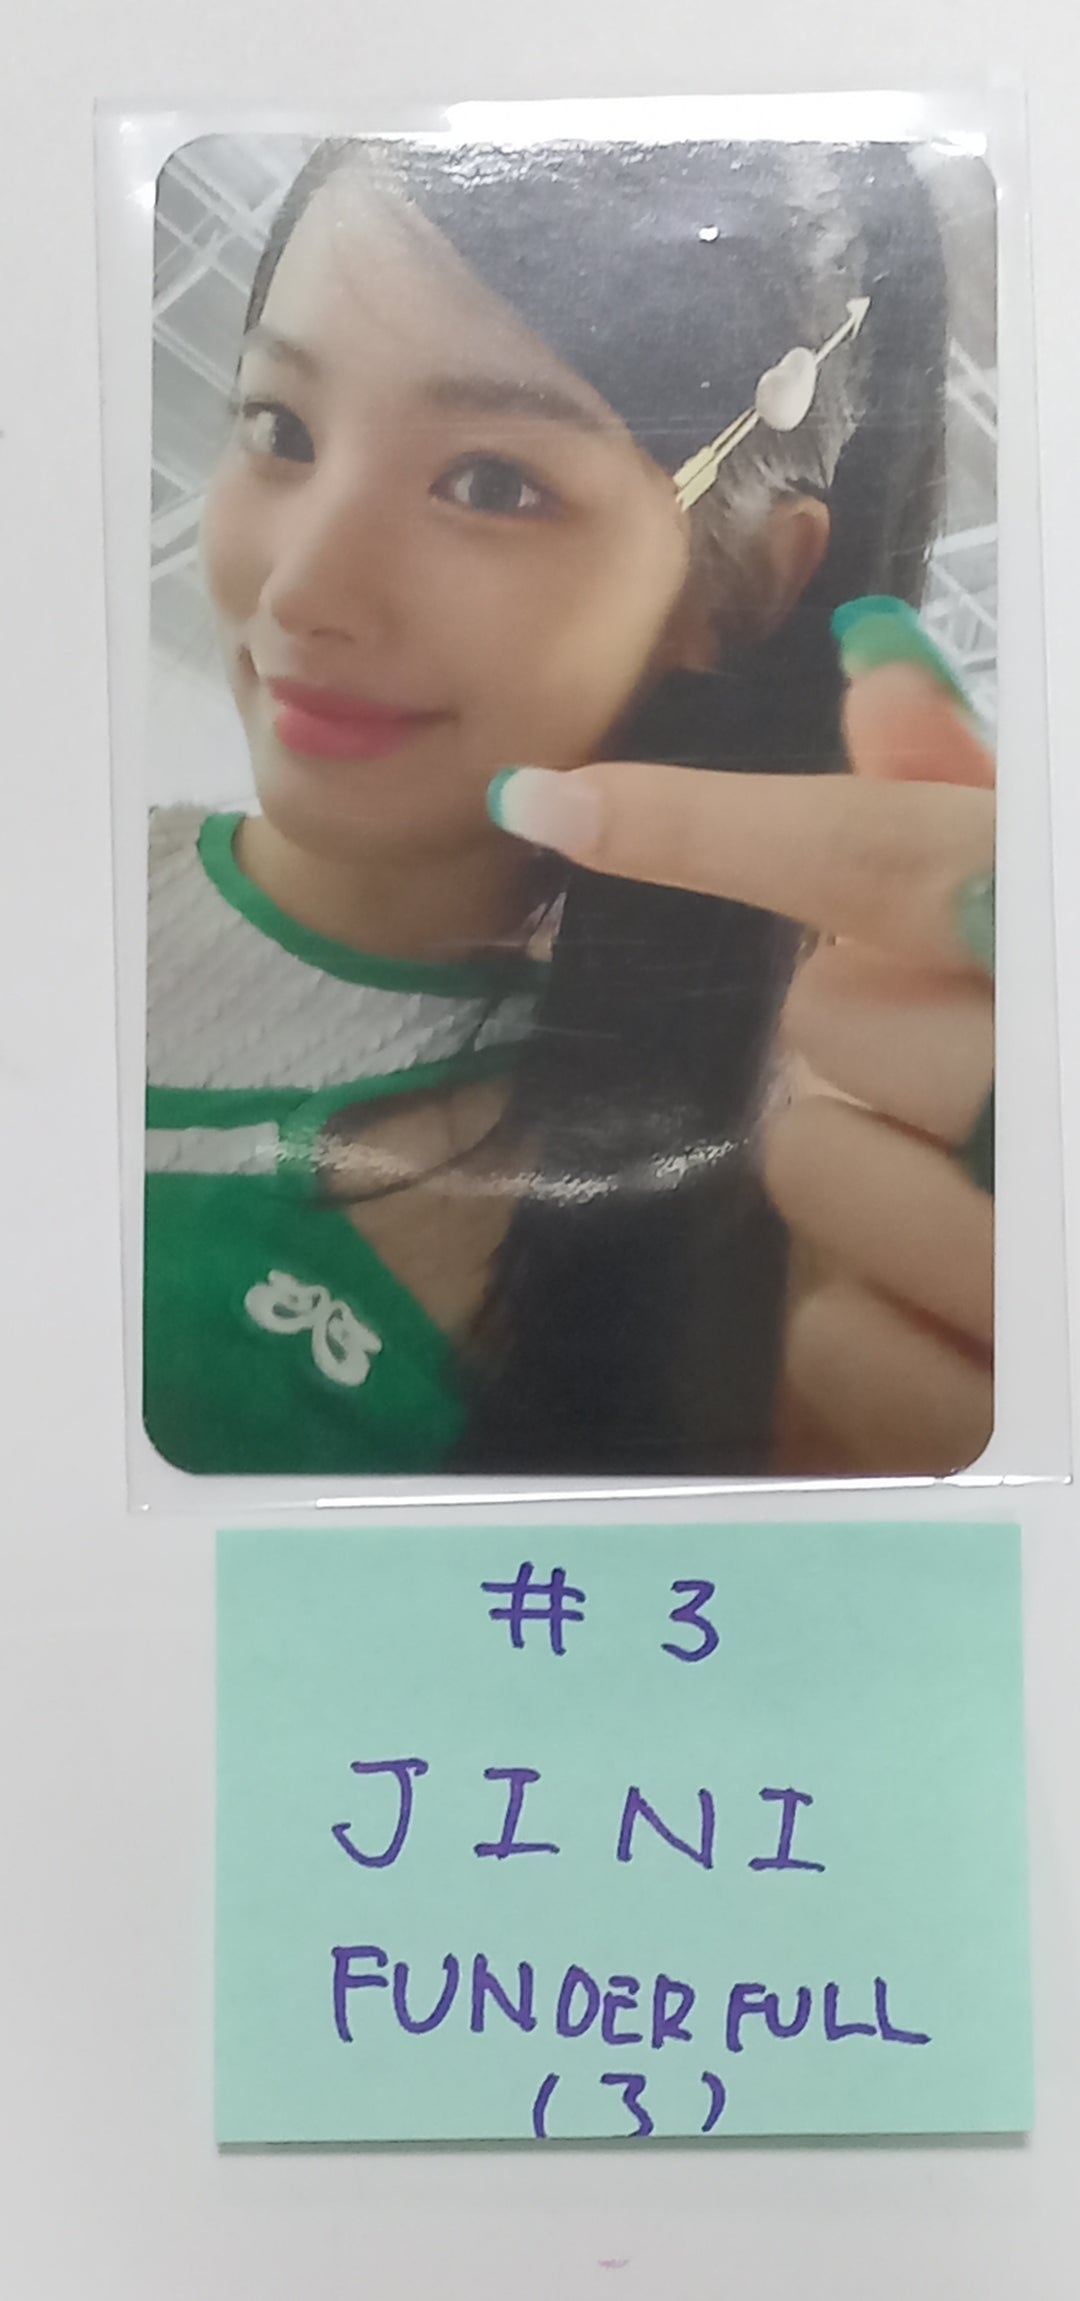 JINI "An Iron Hand In A Velvet Glove" - Funderful Fansign Event Photocard, Mini Holder [23.11.16]